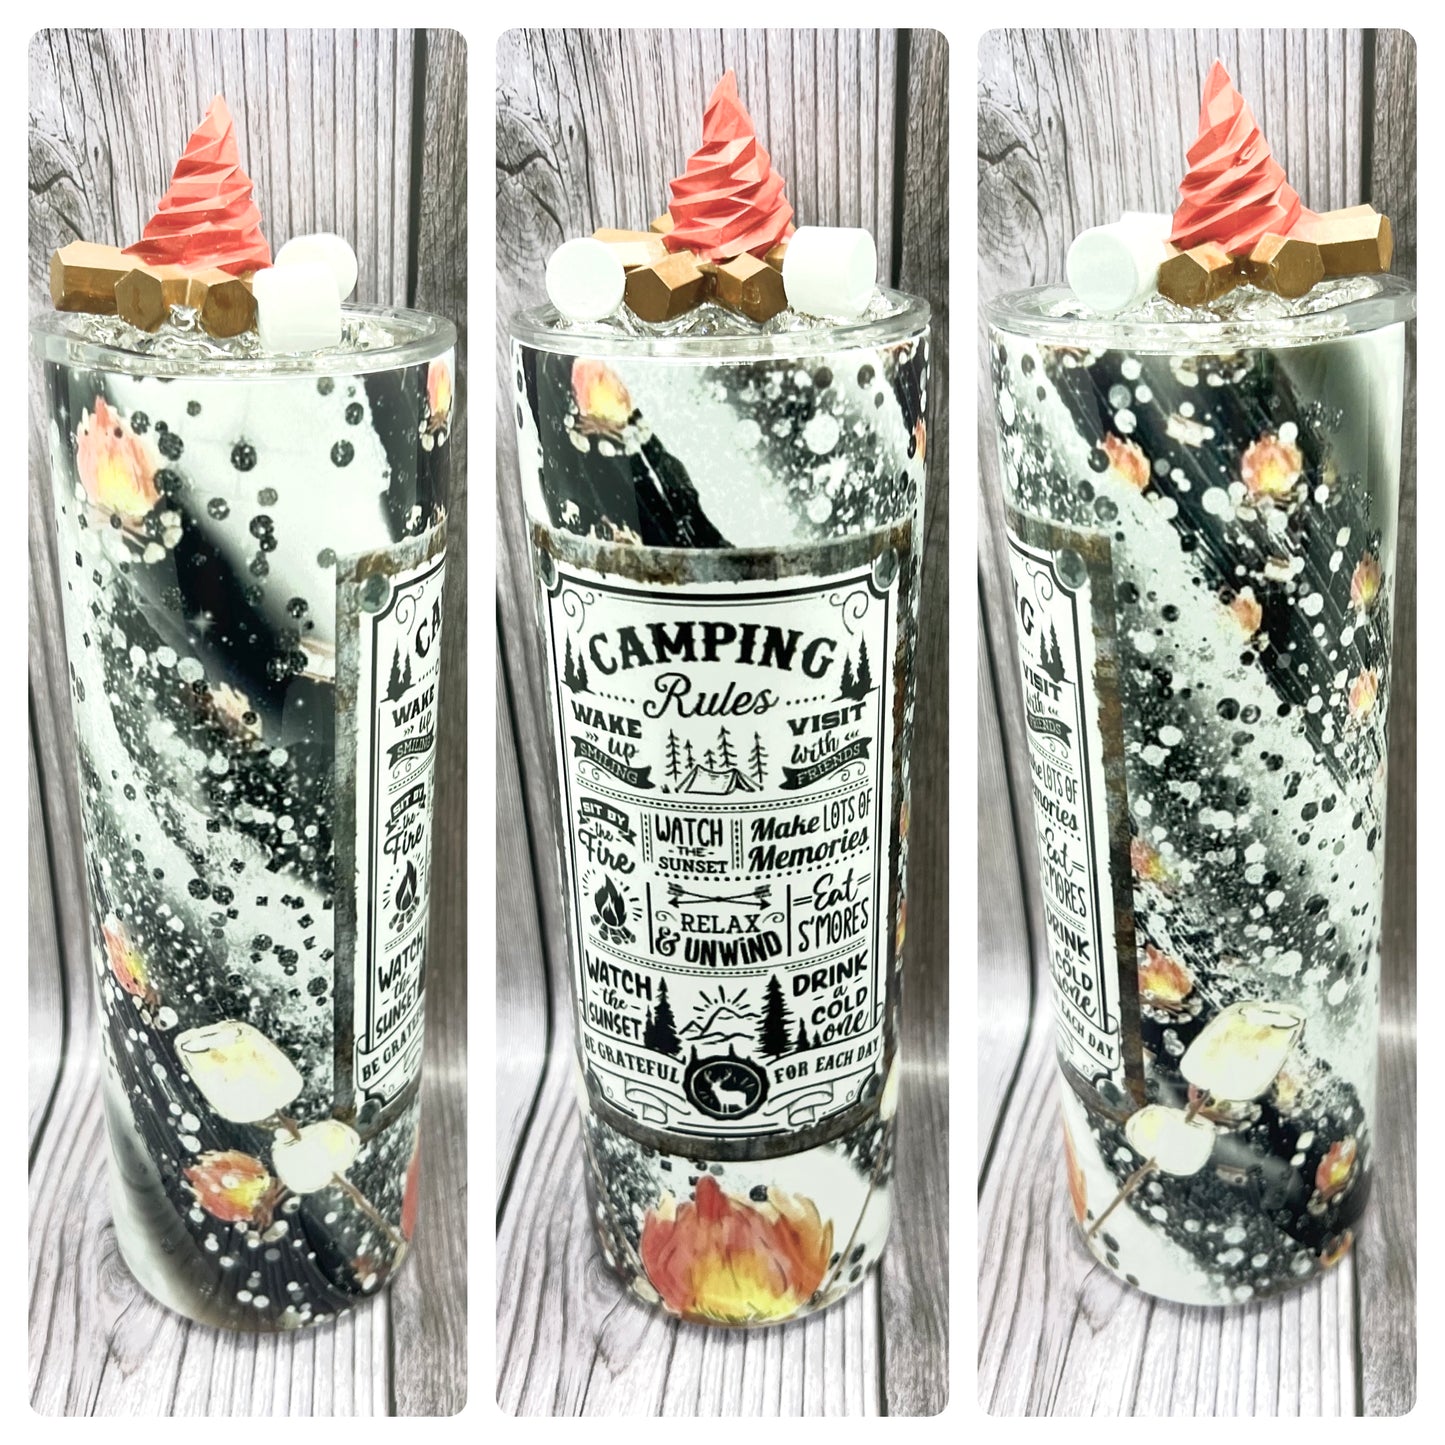 Camping Rules / s’mores tumbler